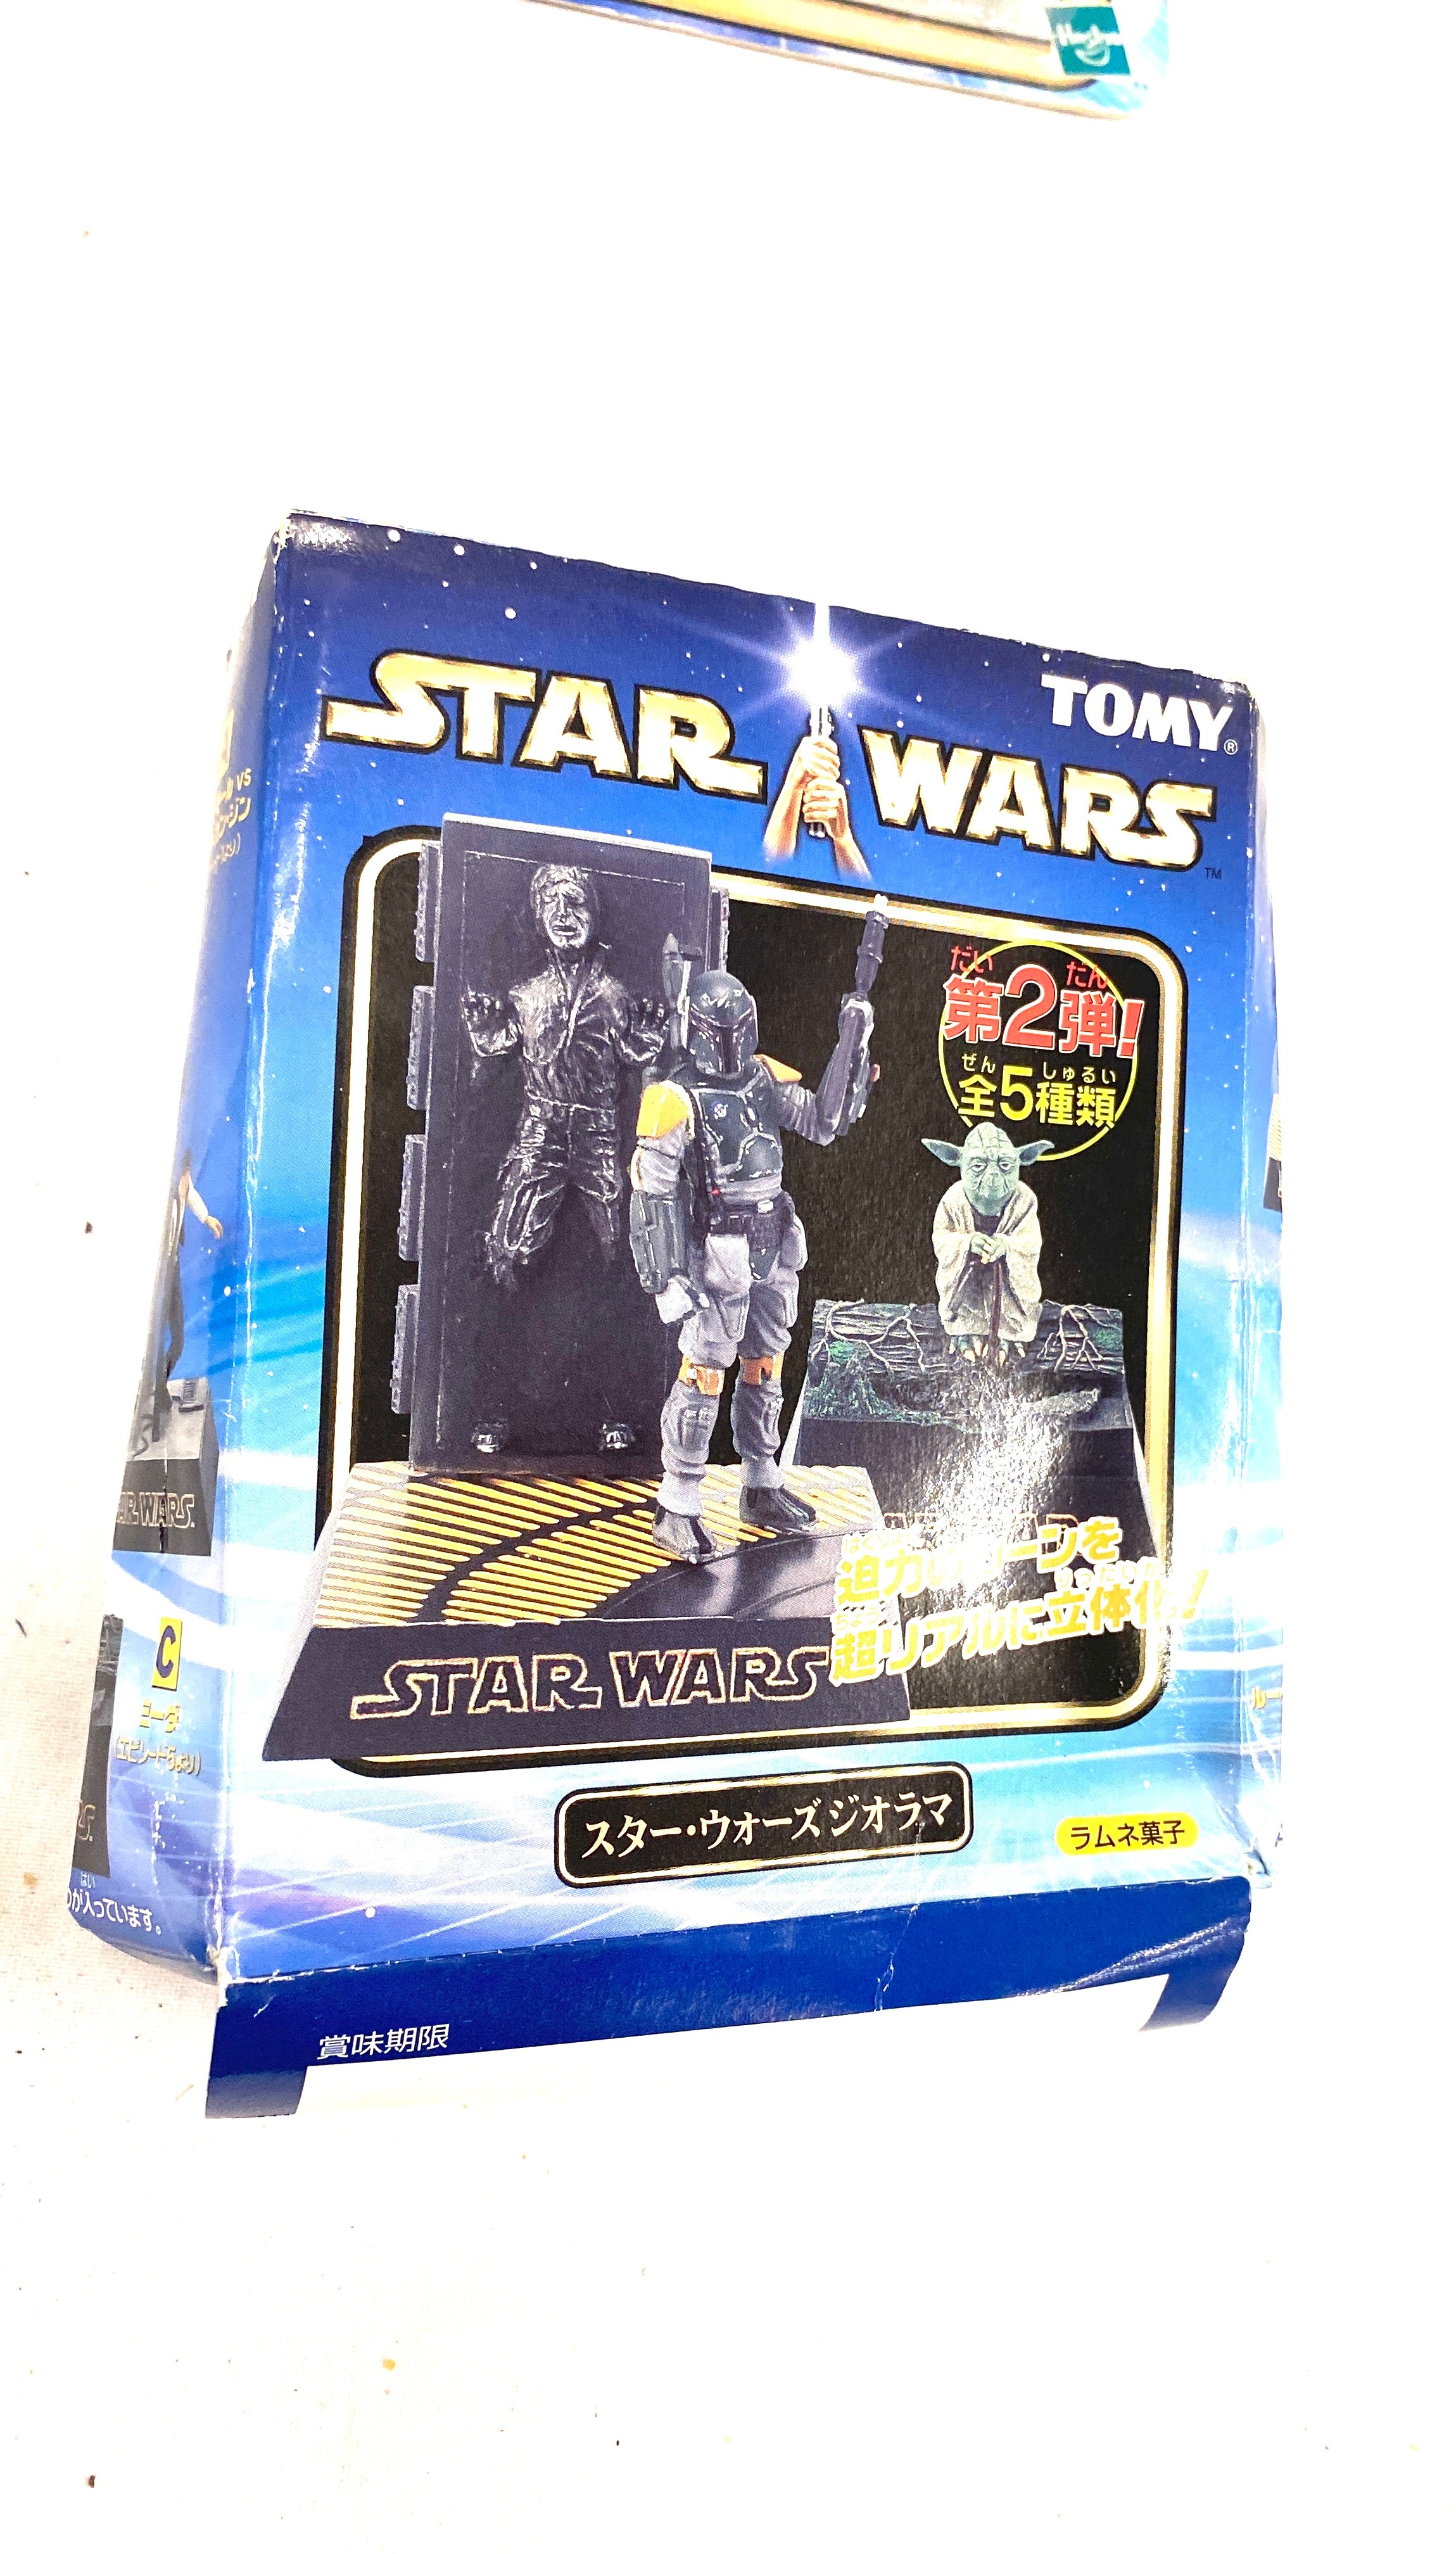 Hasbro boxed Star Wars to include Jango Fett, Orn Free Taa, Power of the Jedi, Tomy Star Wars - Image 6 of 7